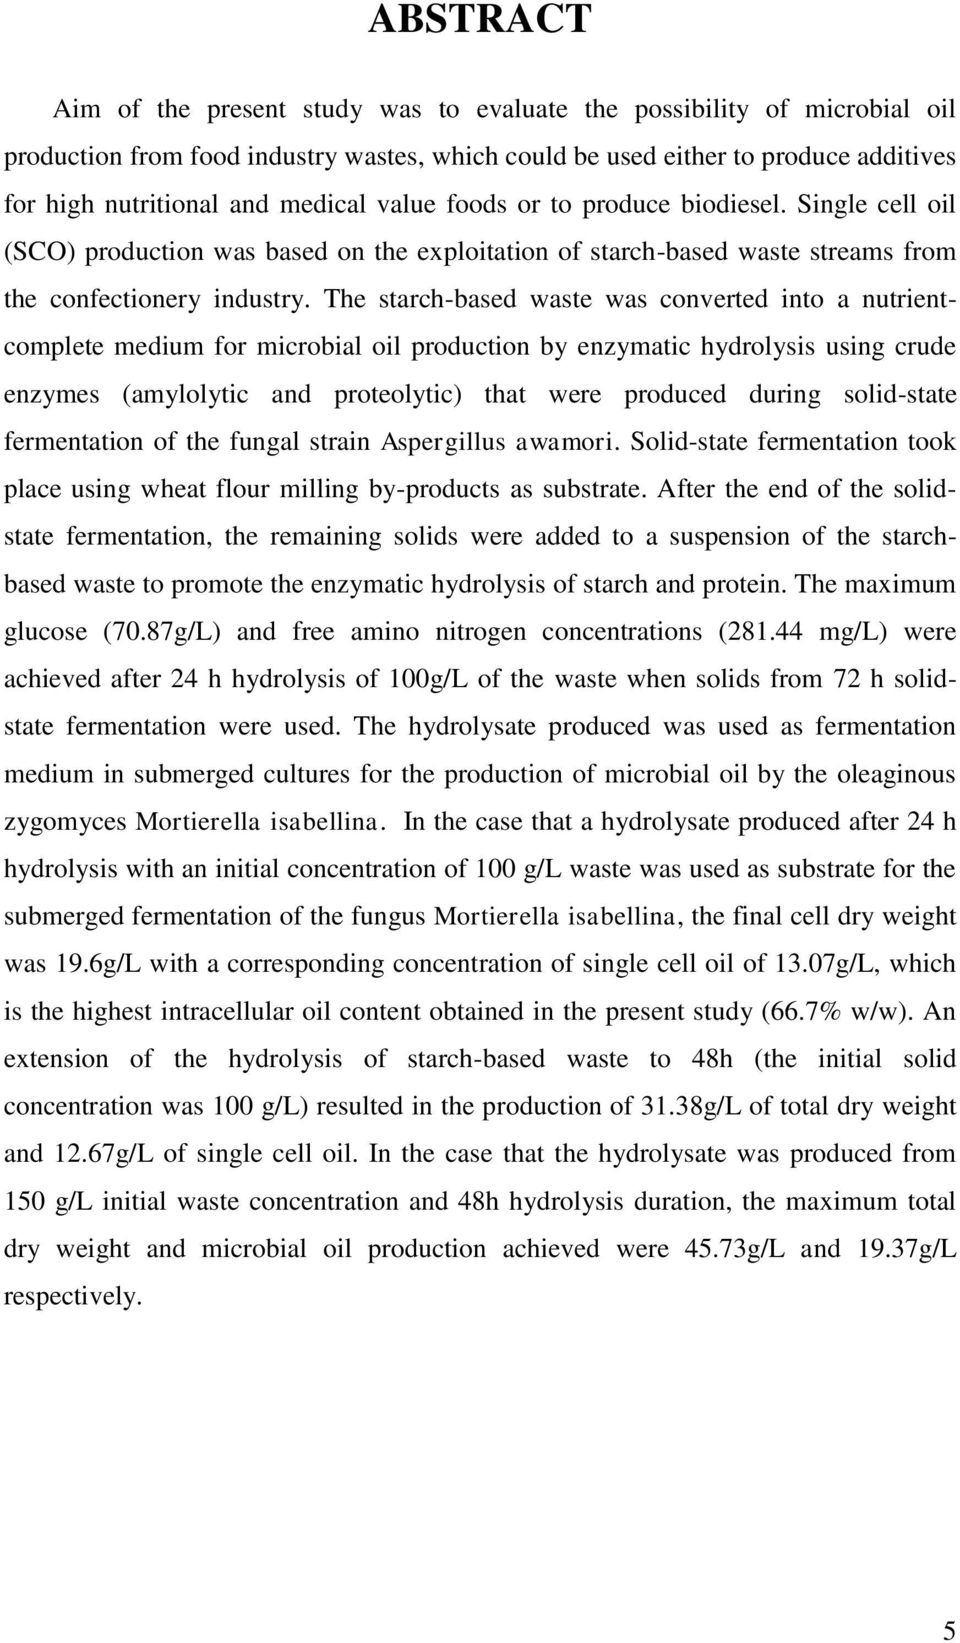 The starch-based waste was converted into a nutrientcomplete medium for microbial oil production by enzymatic hydrolysis using crude enzymes (amylolytic and proteolytic) that were produced during